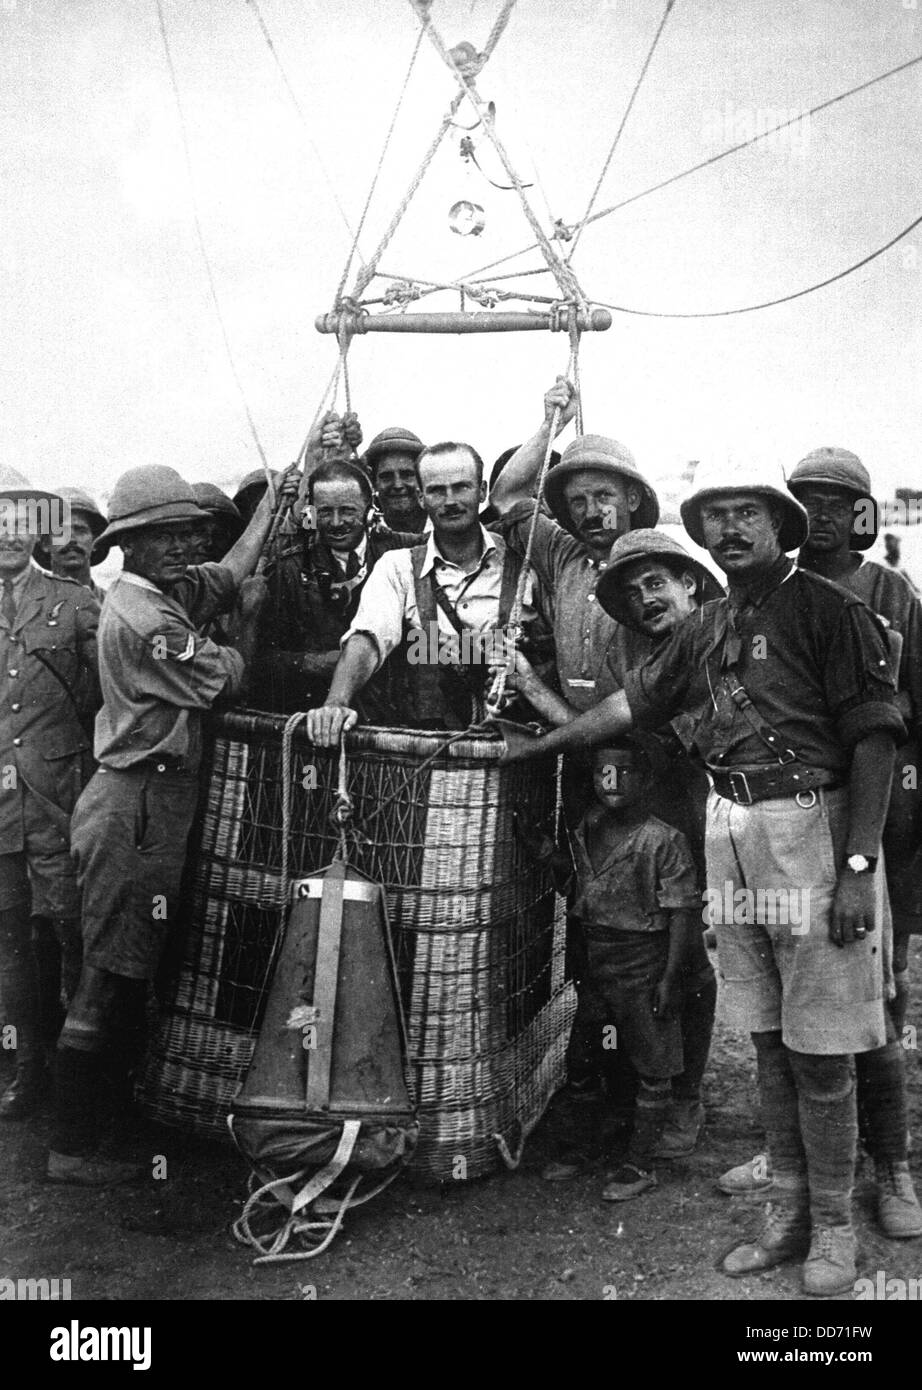 British balloon observers ready to make an ascension in Mesopotamia during World War I. One observer wear headphones and a Stock Photo